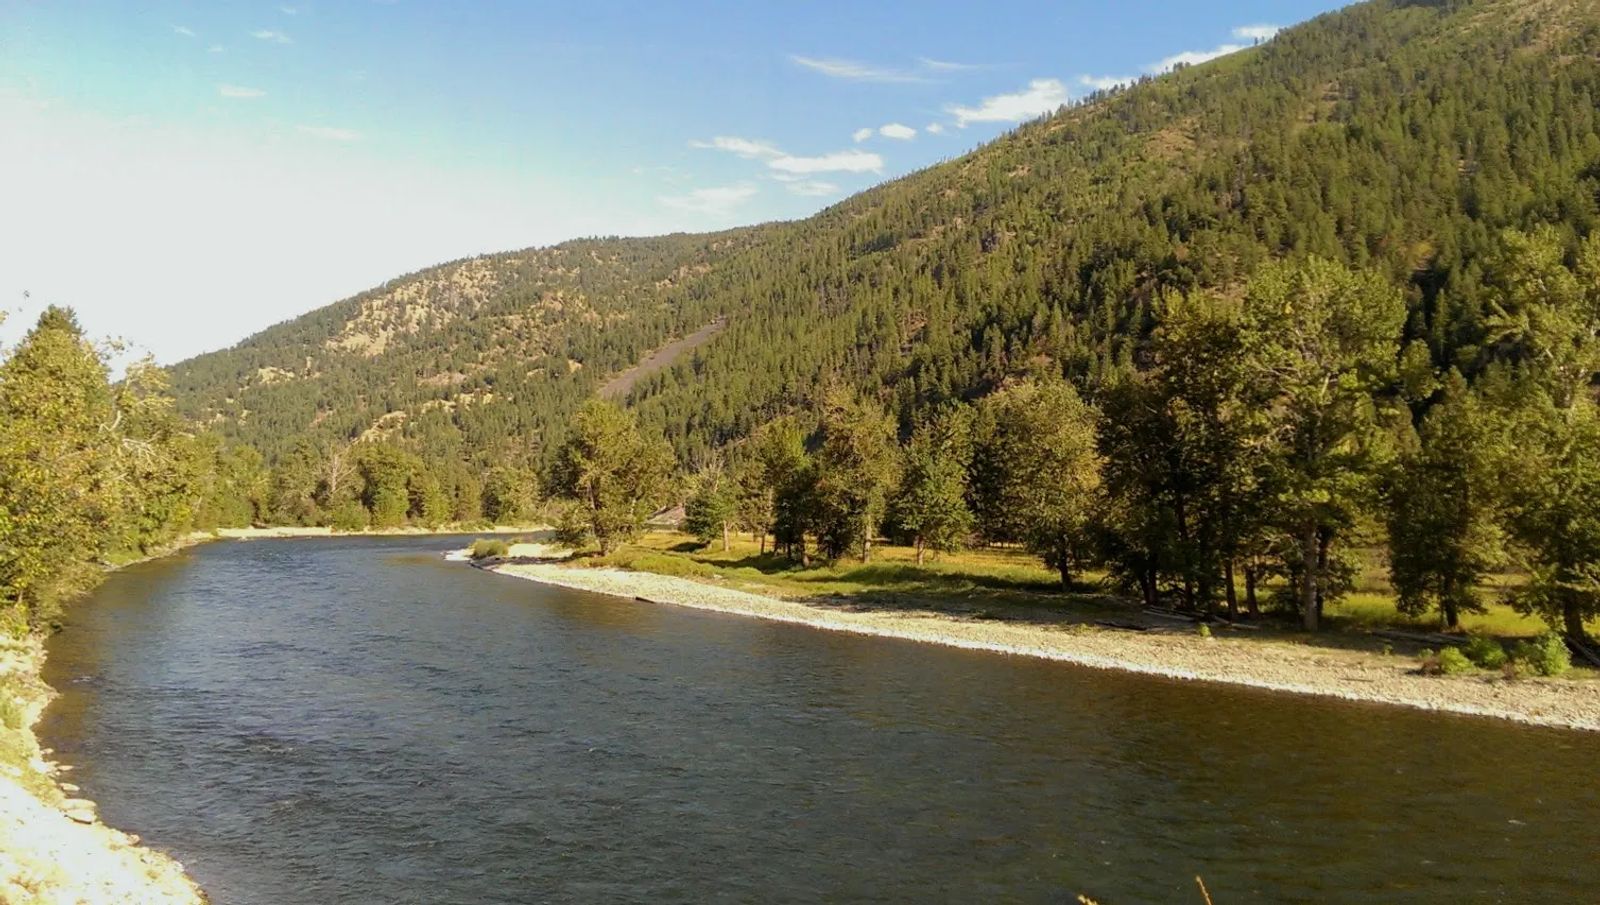 Photo of the Clark Fork River at Hell Gate, near Missoula, Montana